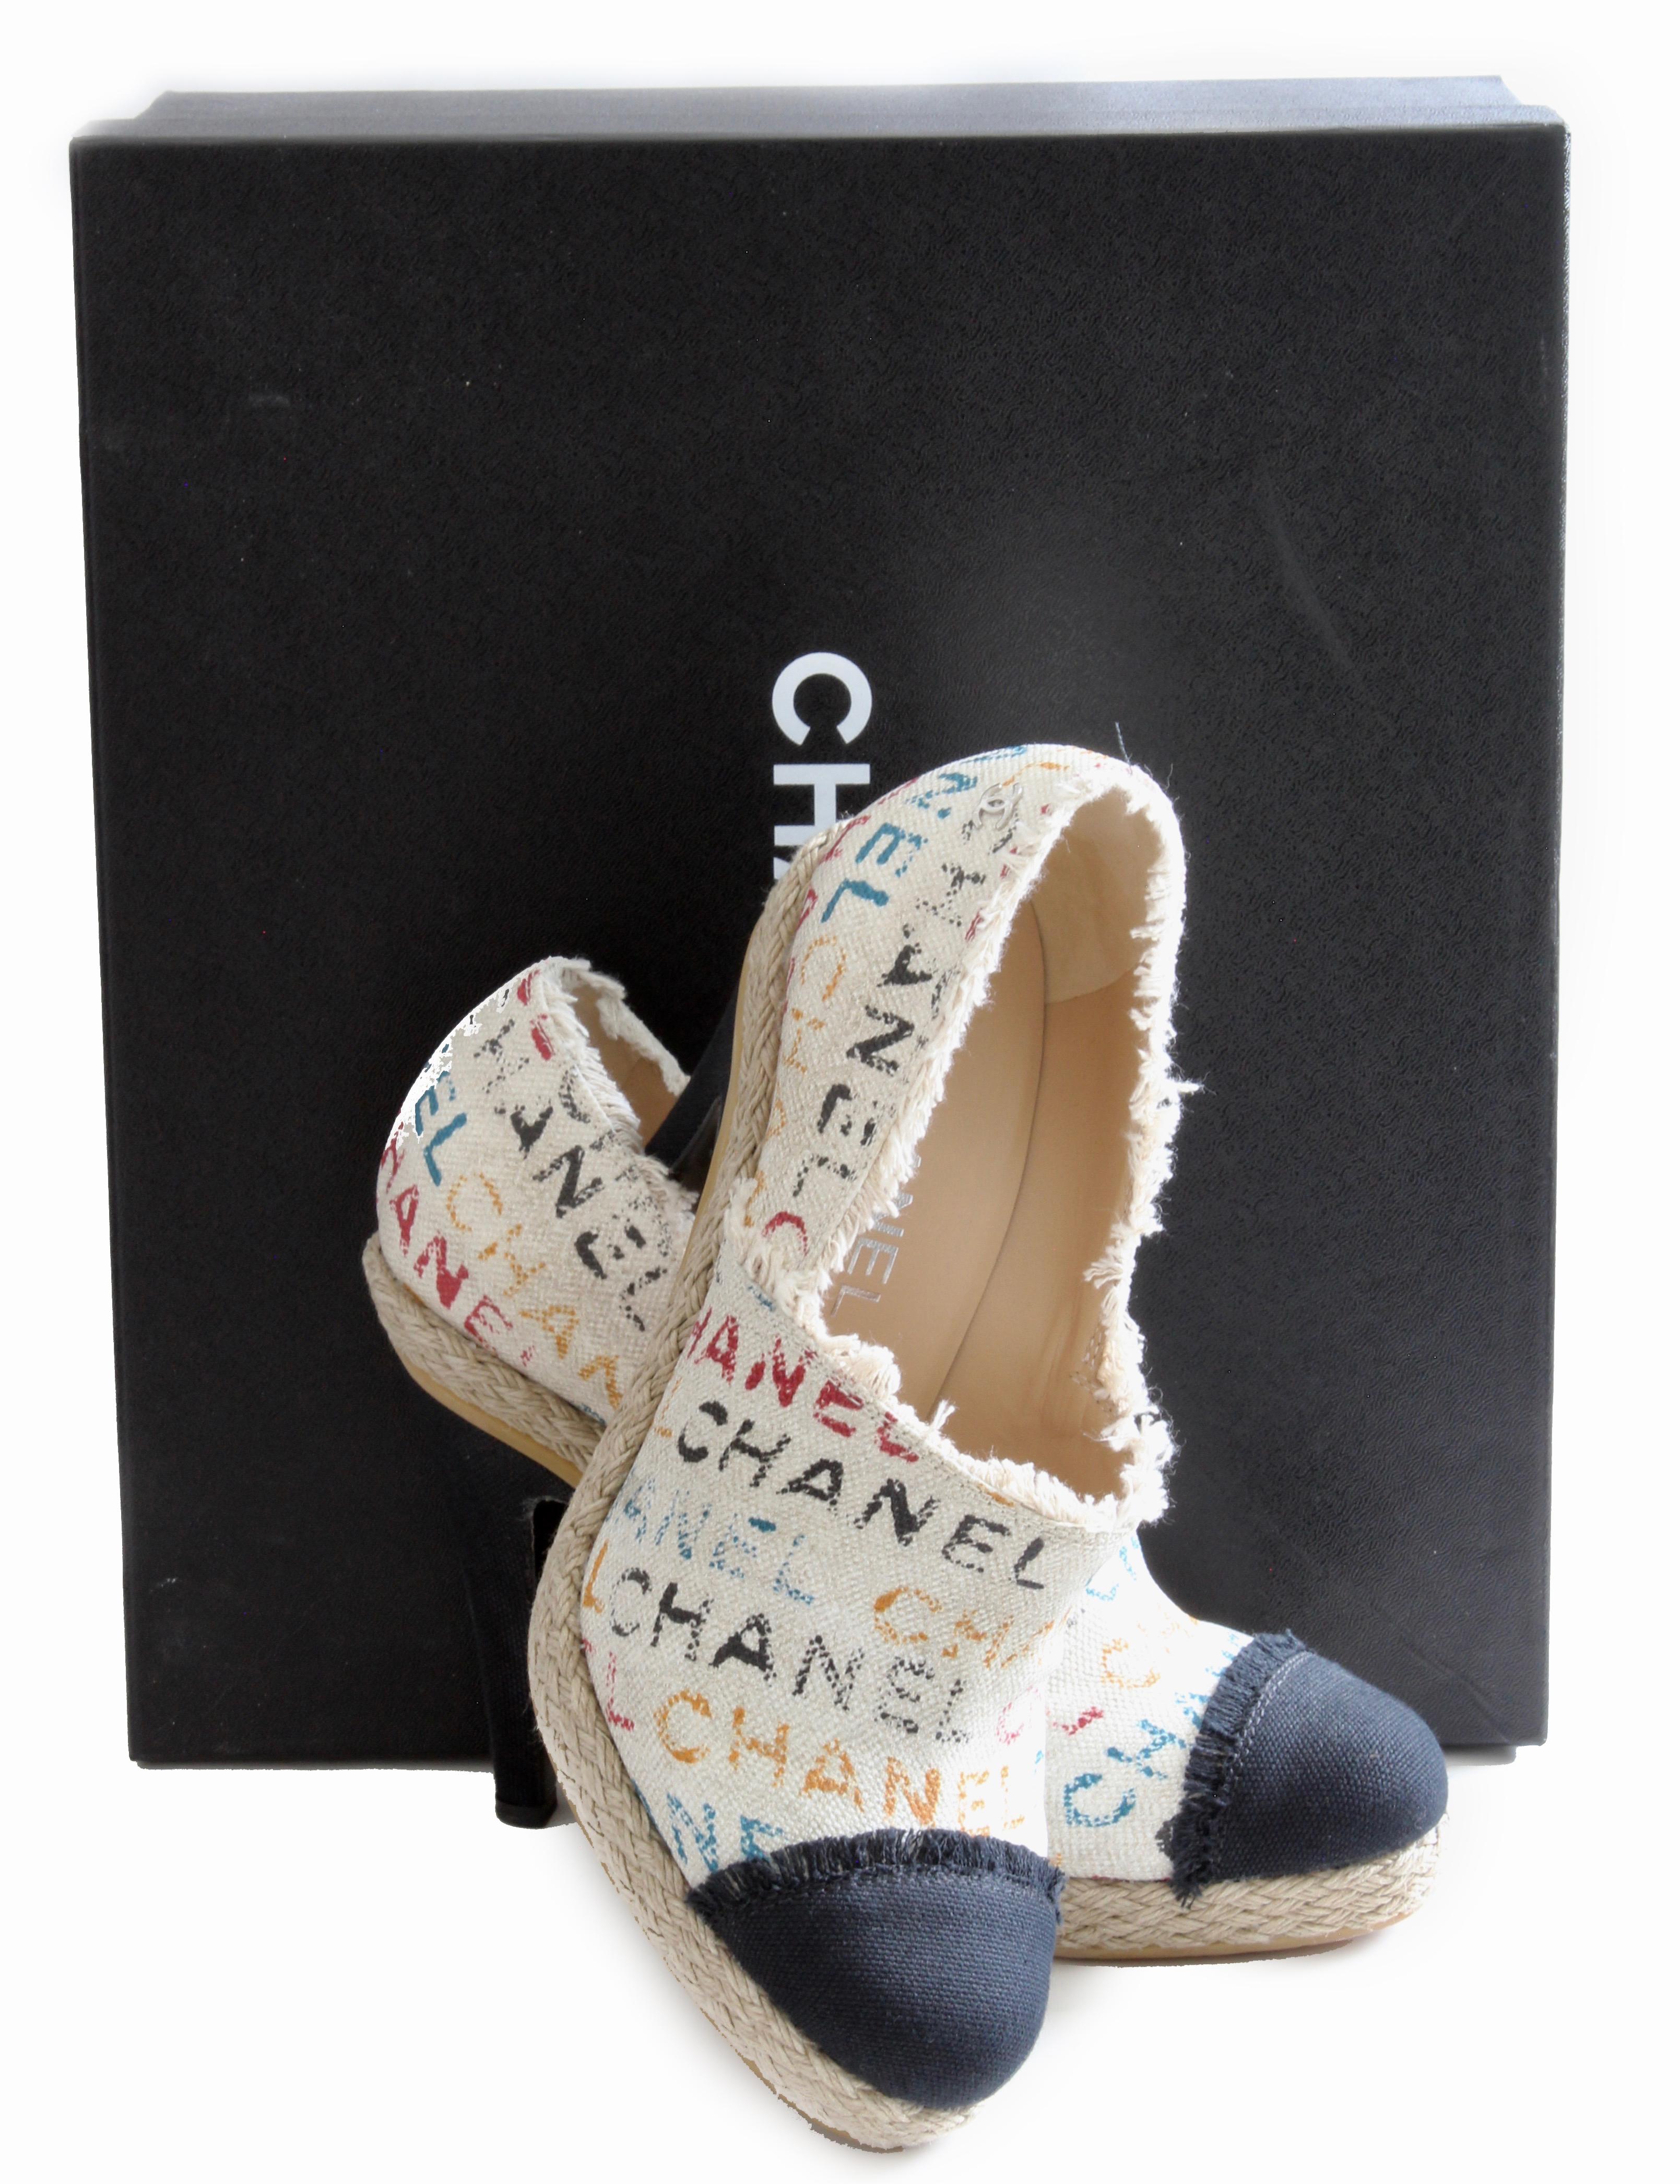 Here's a pair of Limited Edition Chanel Graffiti Toile Espadrille Heels from their Spring 2014 collection.  Made from a fringed multicolor Chanel logo-stamped canvas, they feature round toes and 4.7in heels.  Slip-on style with a small silver CC